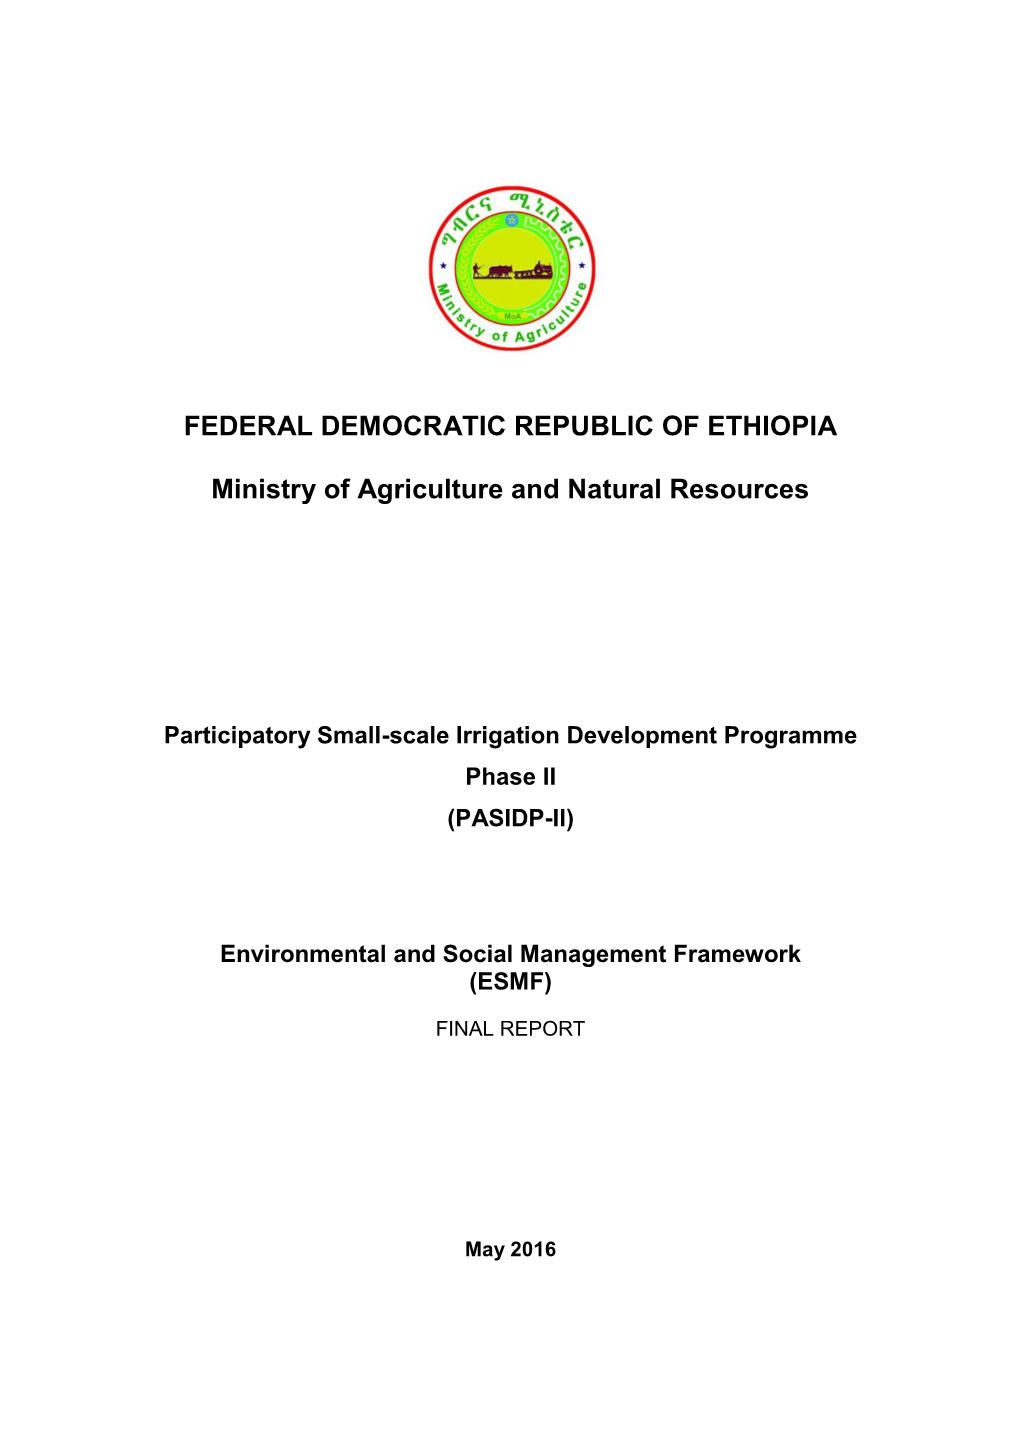 FEDERAL DEMOCRATIC REPUBLIC of ETHIOPIA Ministry of Agriculture